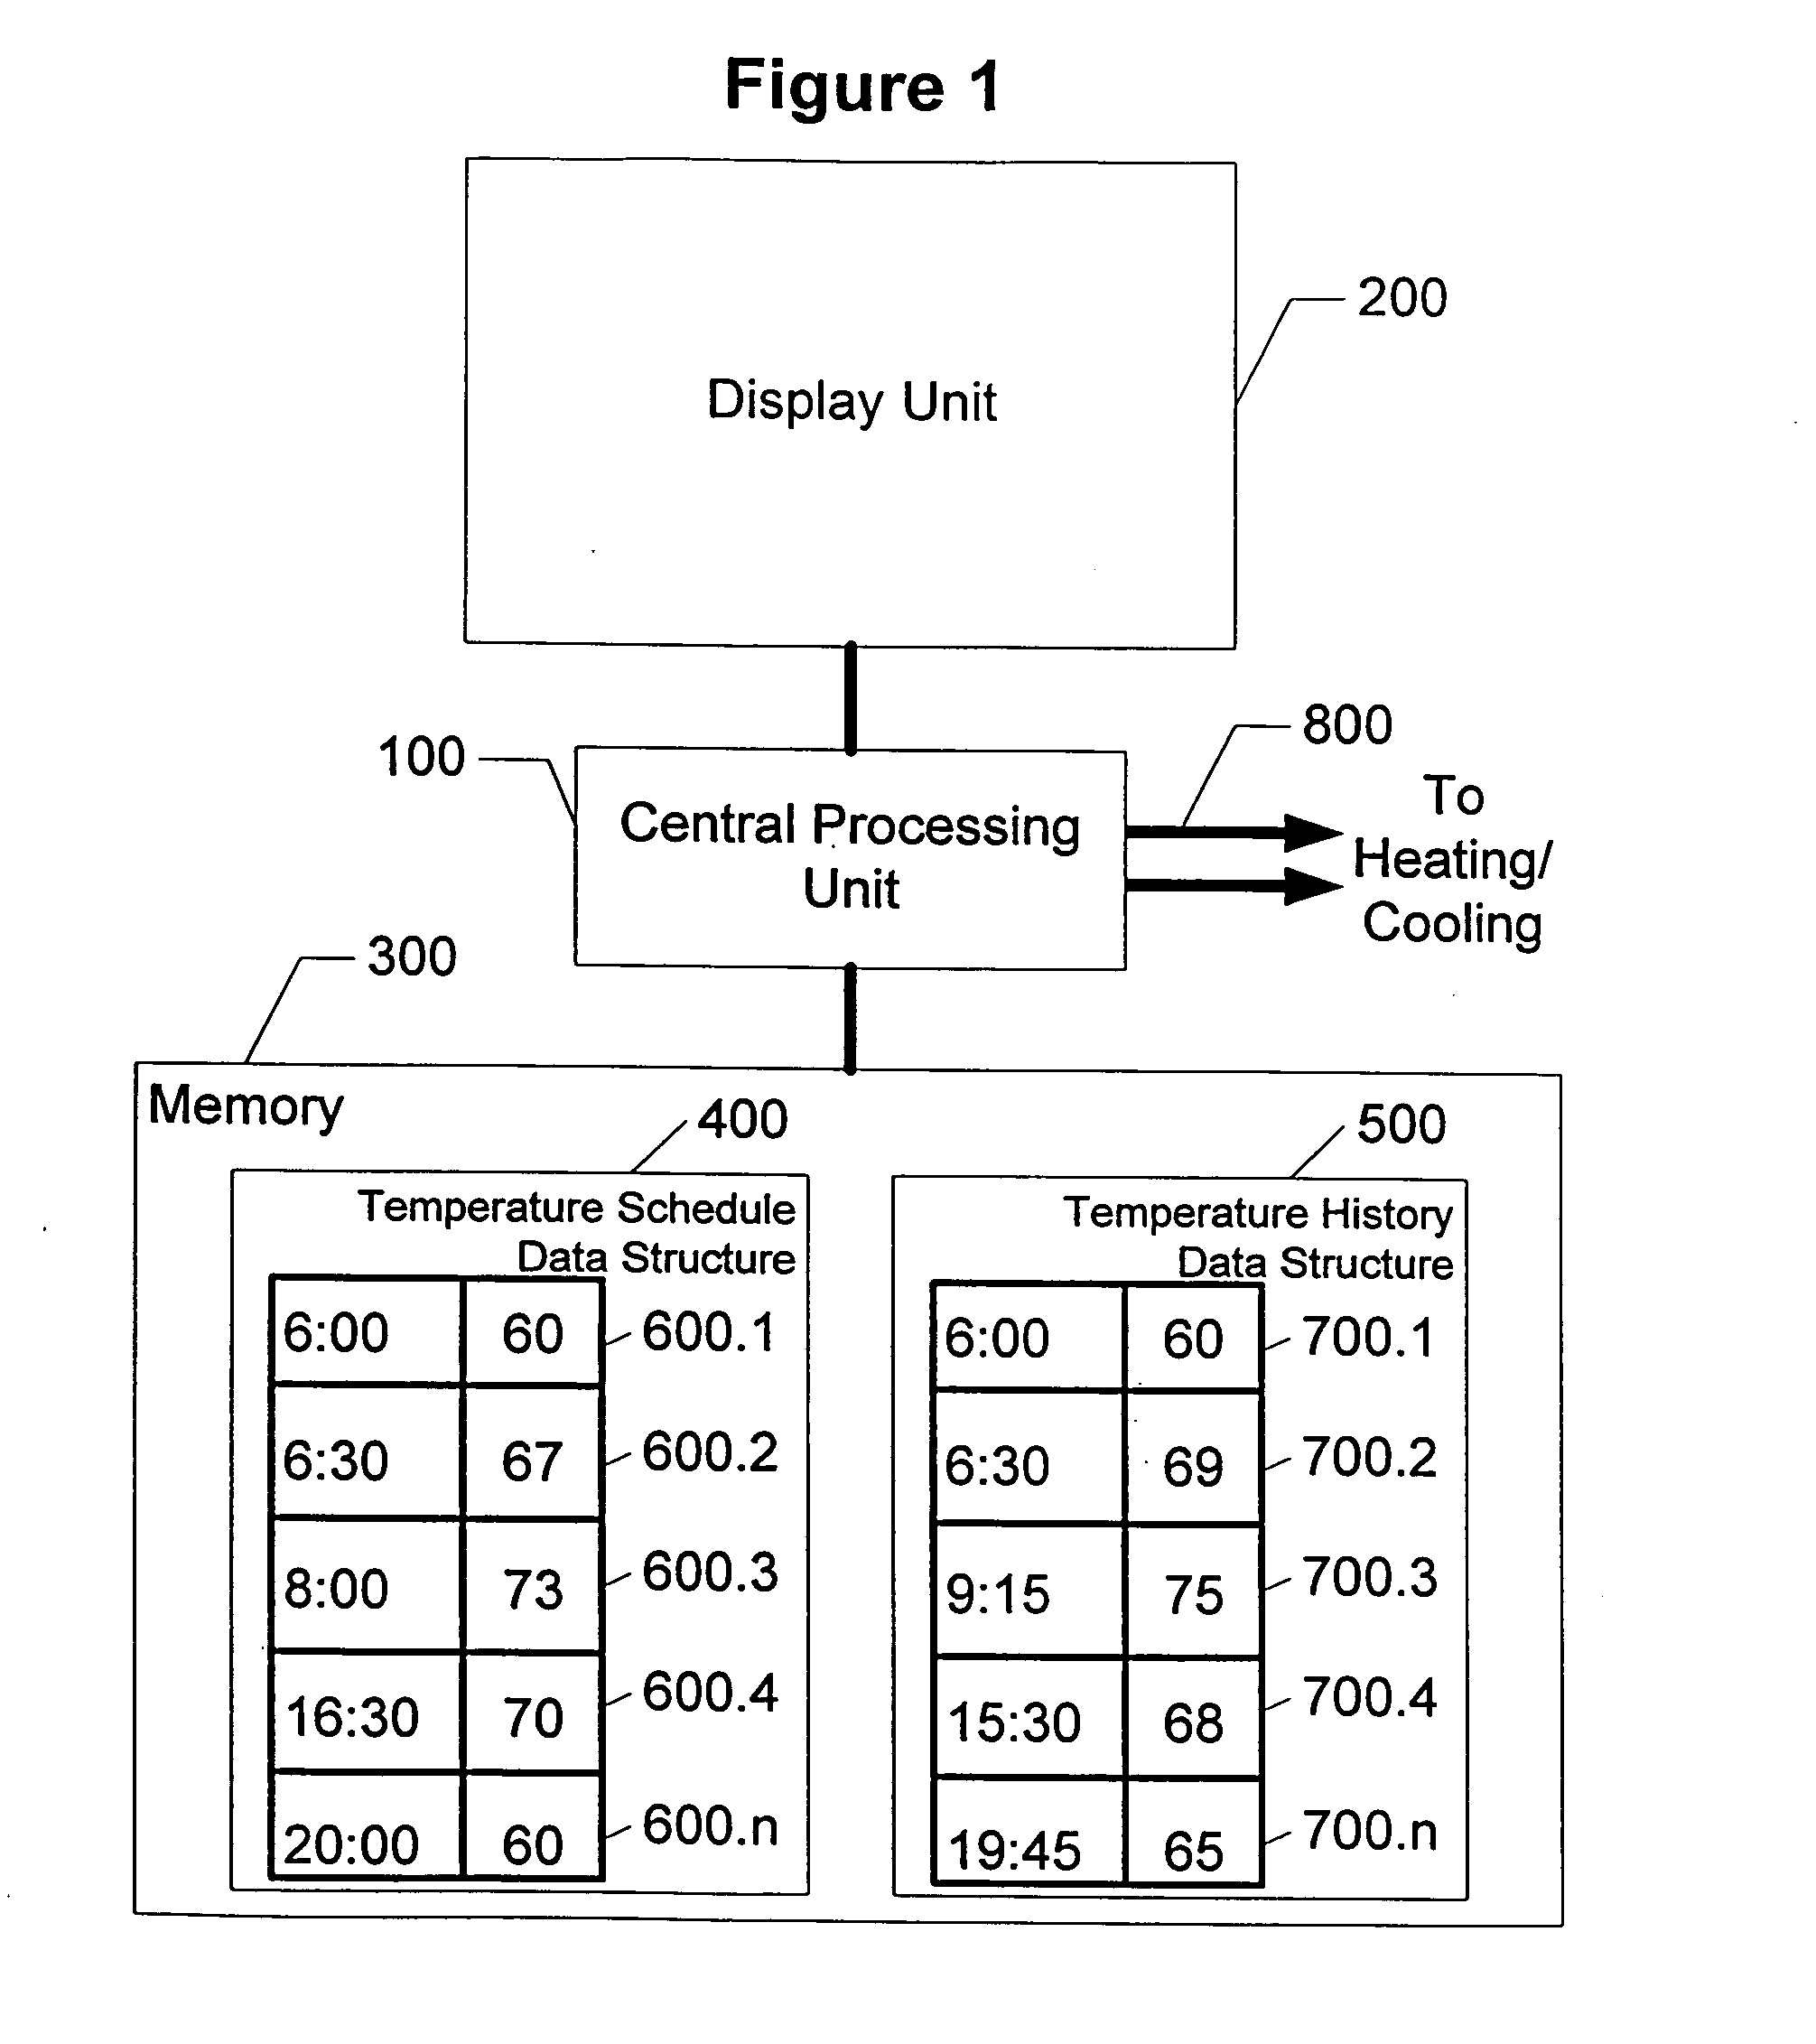 Graphical user interface system for a thermal comfort controller